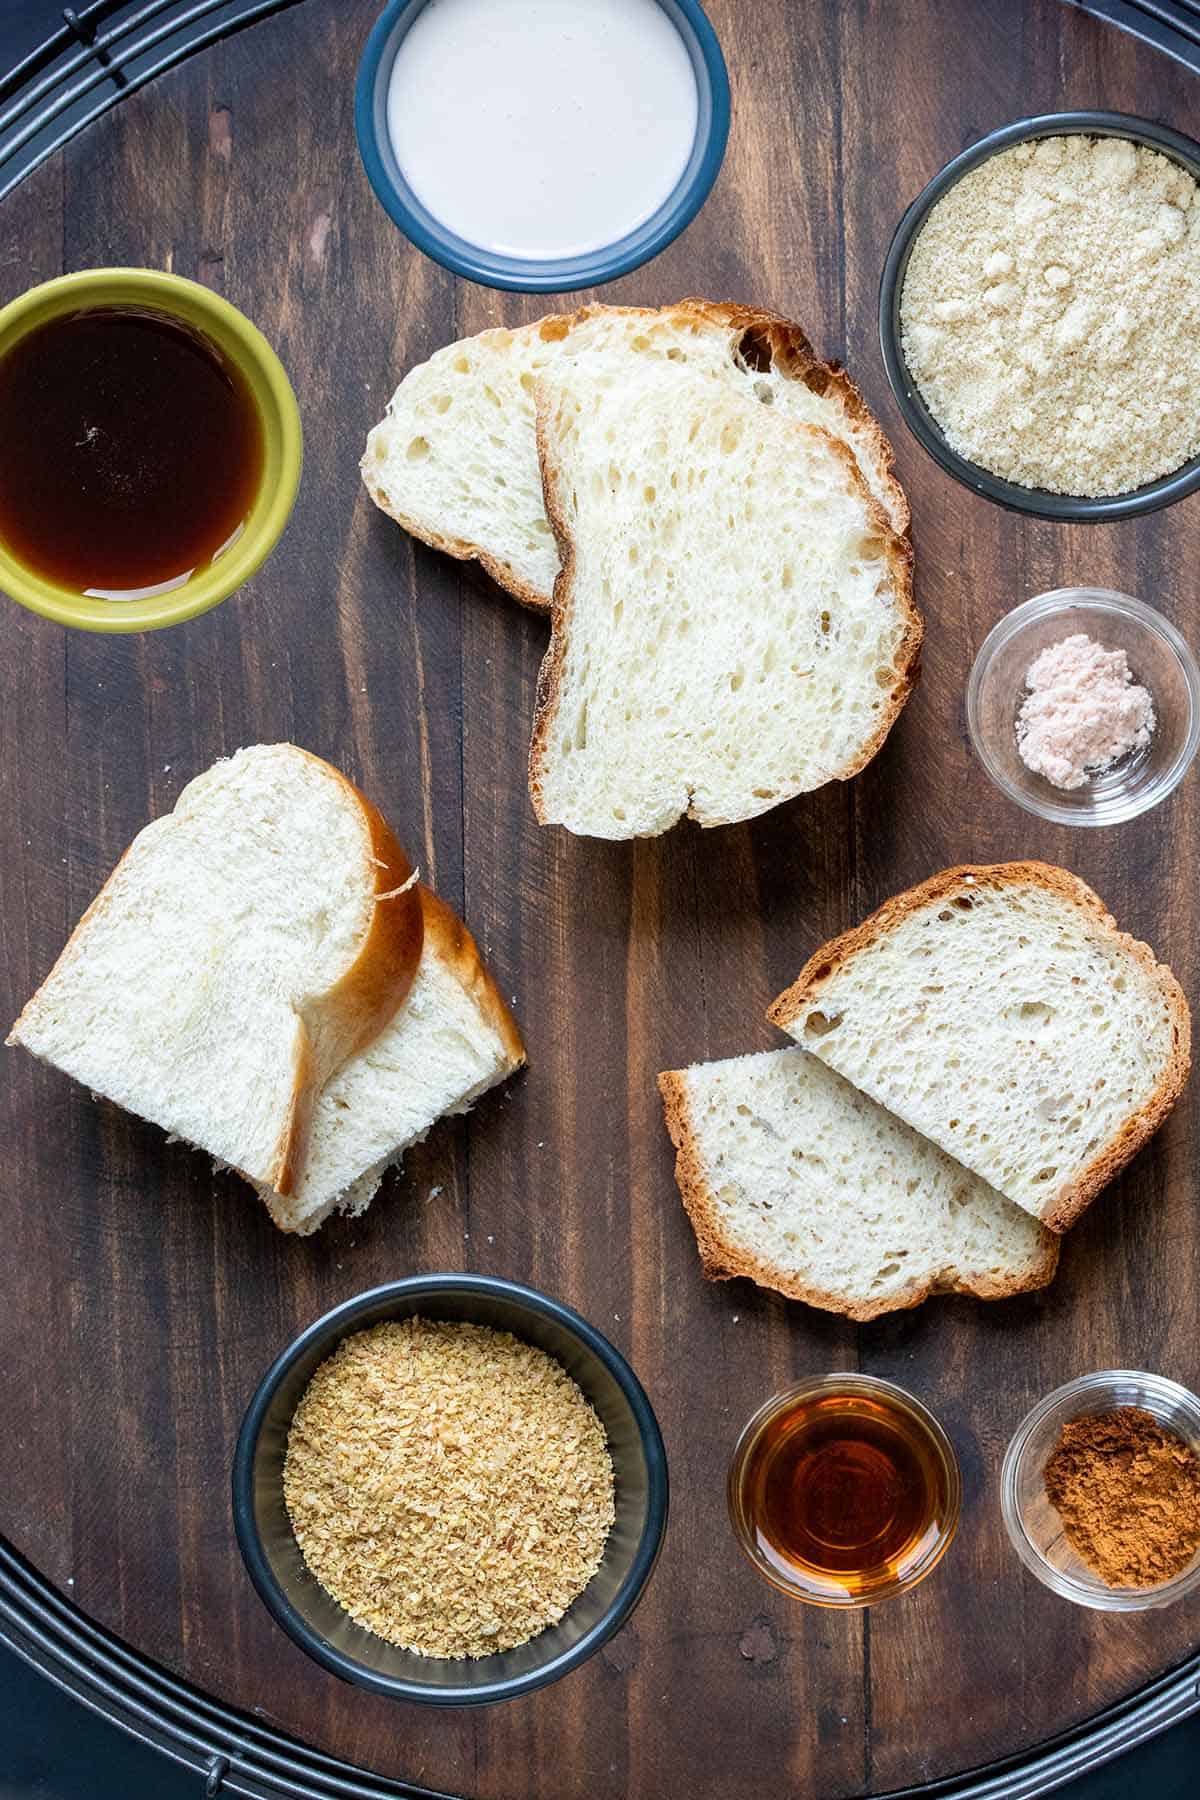 Piles of pairs of bread pieces on a wooden surface surrounded by bowls of ingredients to make the dip.